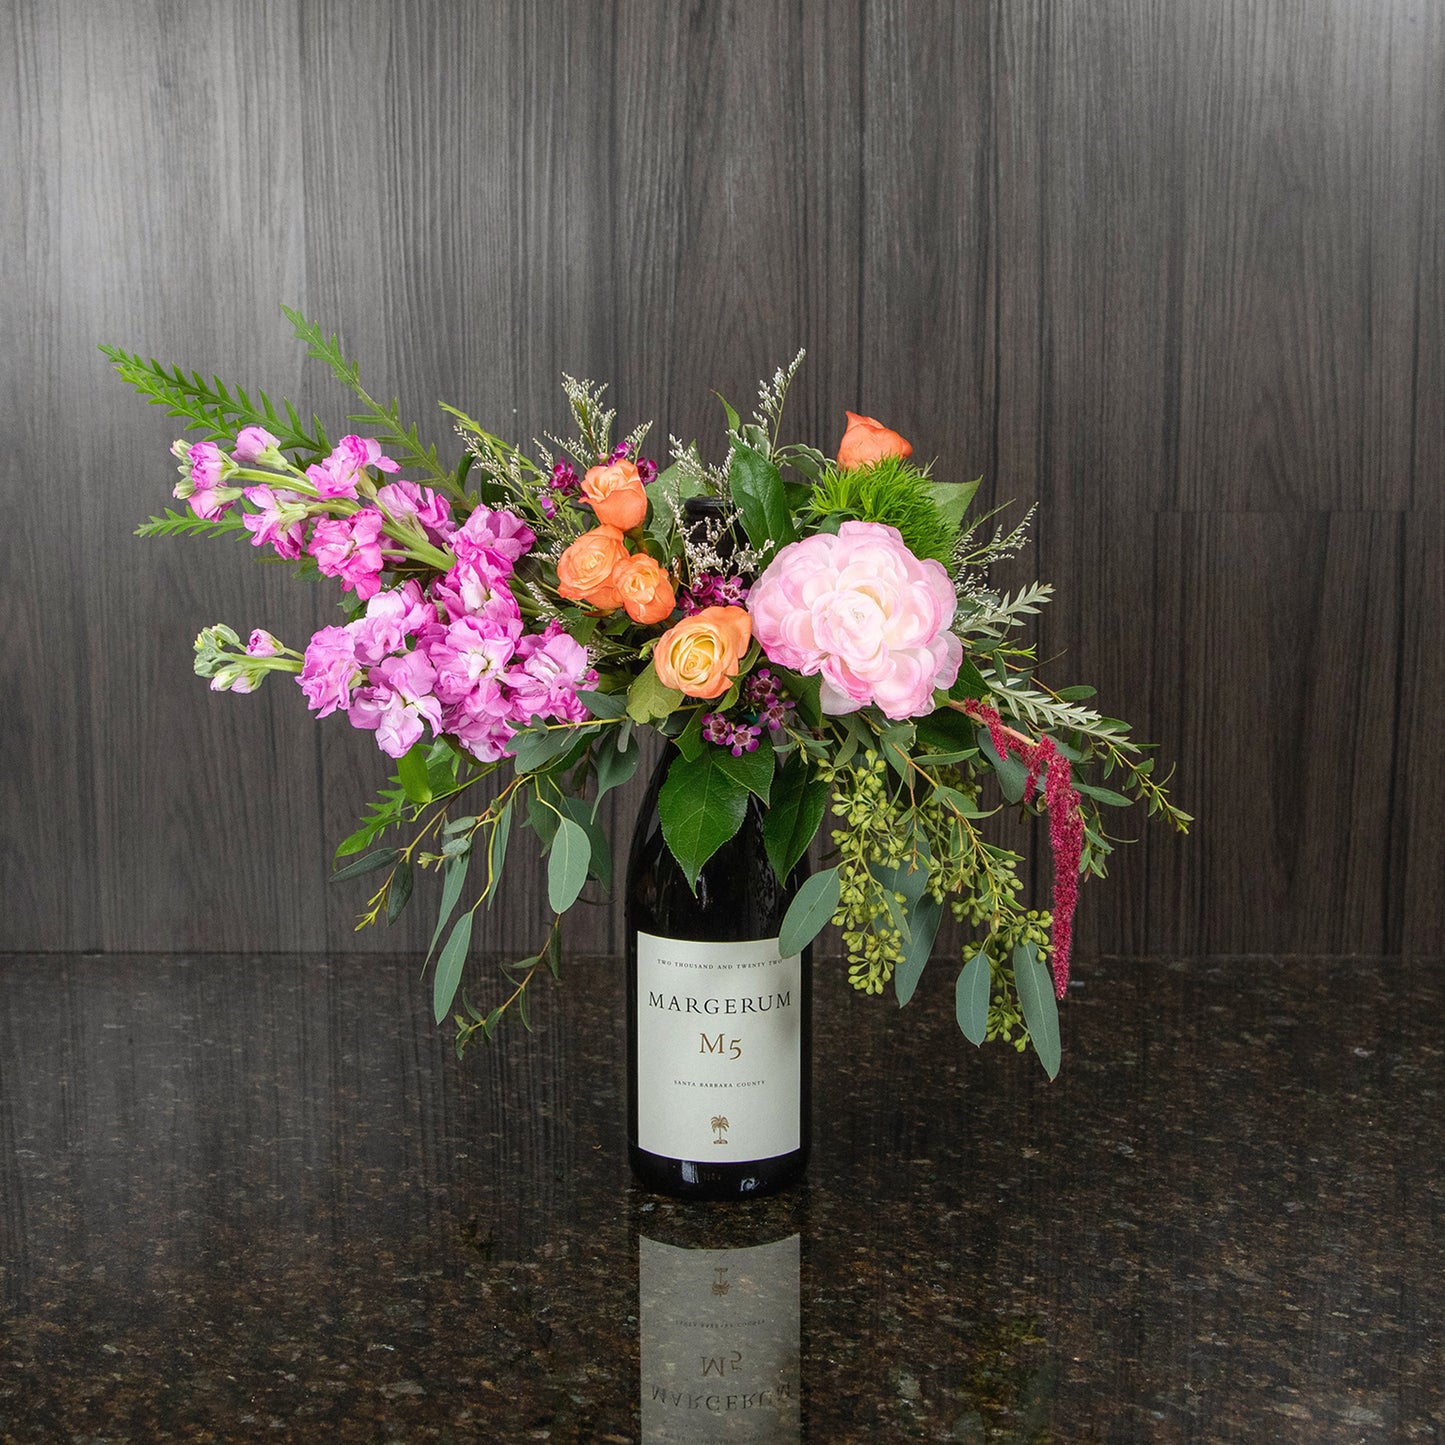 a flower arrangement on top of a bottle of red wine